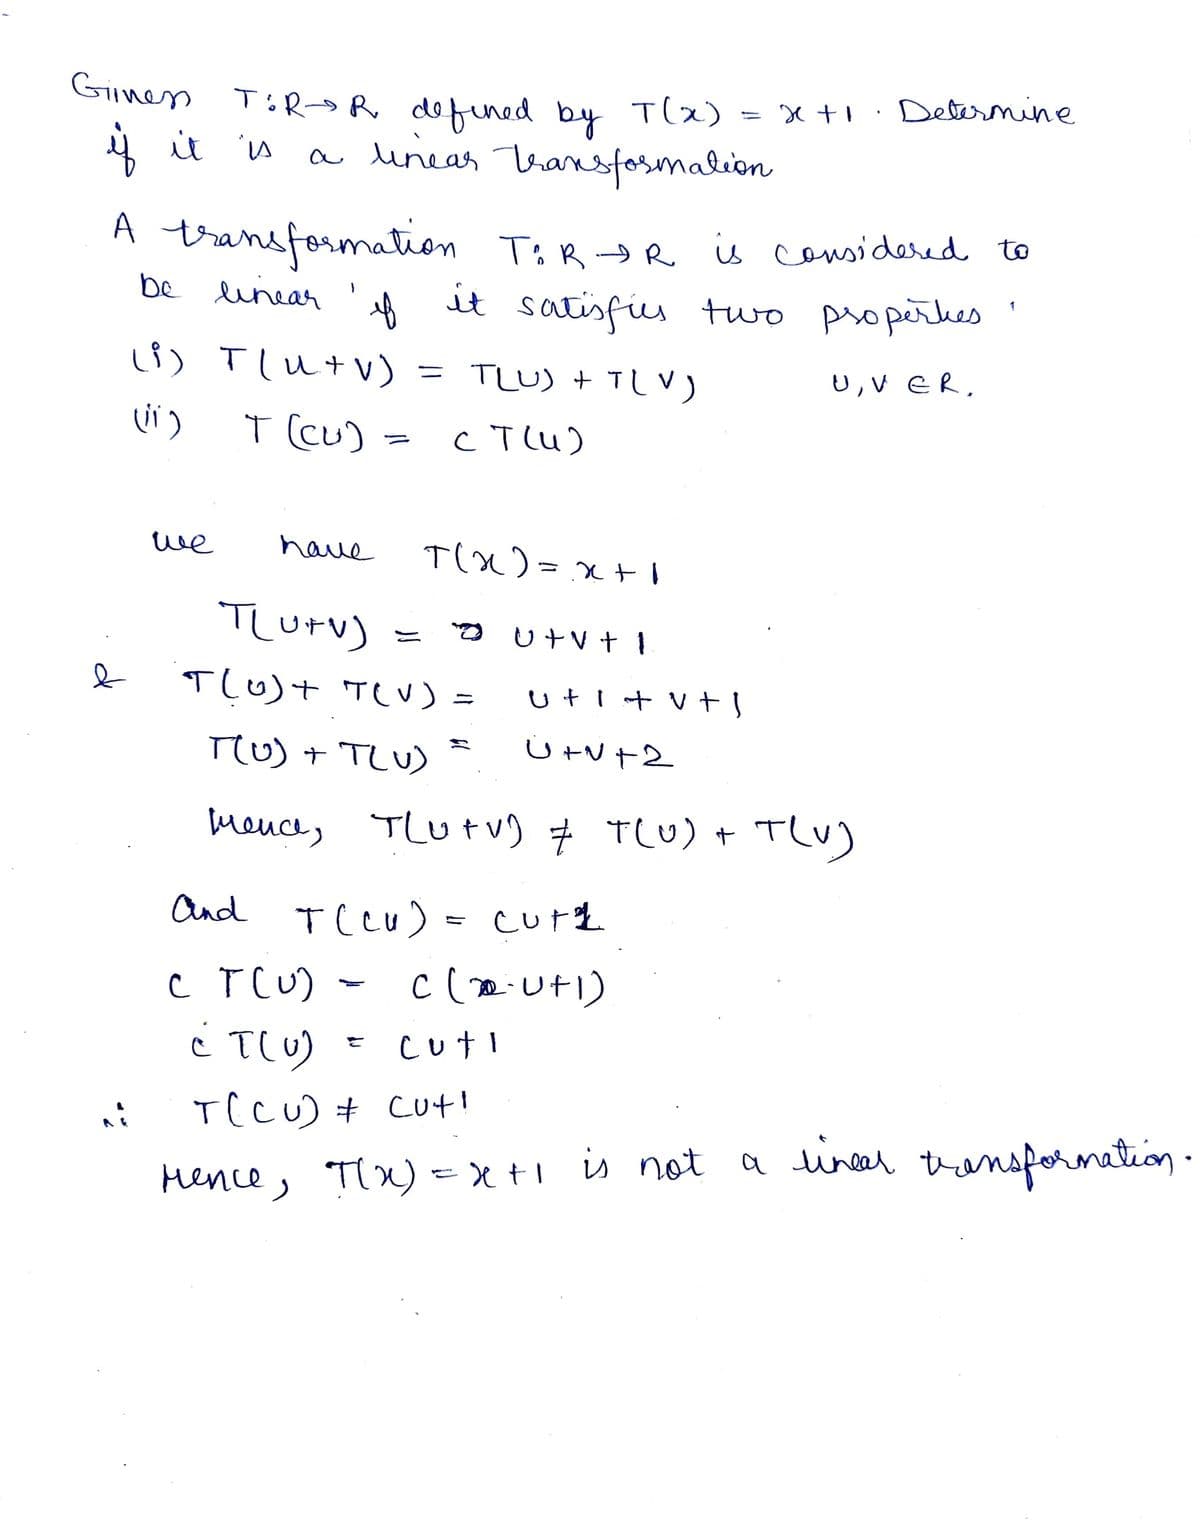 Giness TóR-R defined by T(x)
if it is
a linear transformation
A transformation T&R-DR
f
be linear
(i) T[u+V) = TLU) + TLV)
(11)
T (Cu)
ст(и)
e
we
have
T(x)=x+
TOR-DR is considered to
it satisfies two properkes
U, VER,
TLU+V)
T(0) + T(V) =
T(U) + T(U)
mence,
ut v tl
uti + v + l
x+1
U+v+2
cuti
TLU+V) & T(U) + T(U)
Determine
1
And
T(CU) = Cuth
C T(U) - C(2U+1)
¿ T(U)
T(CU) cut!
Mence, π(x)=x+1 is not a lineer transformation.